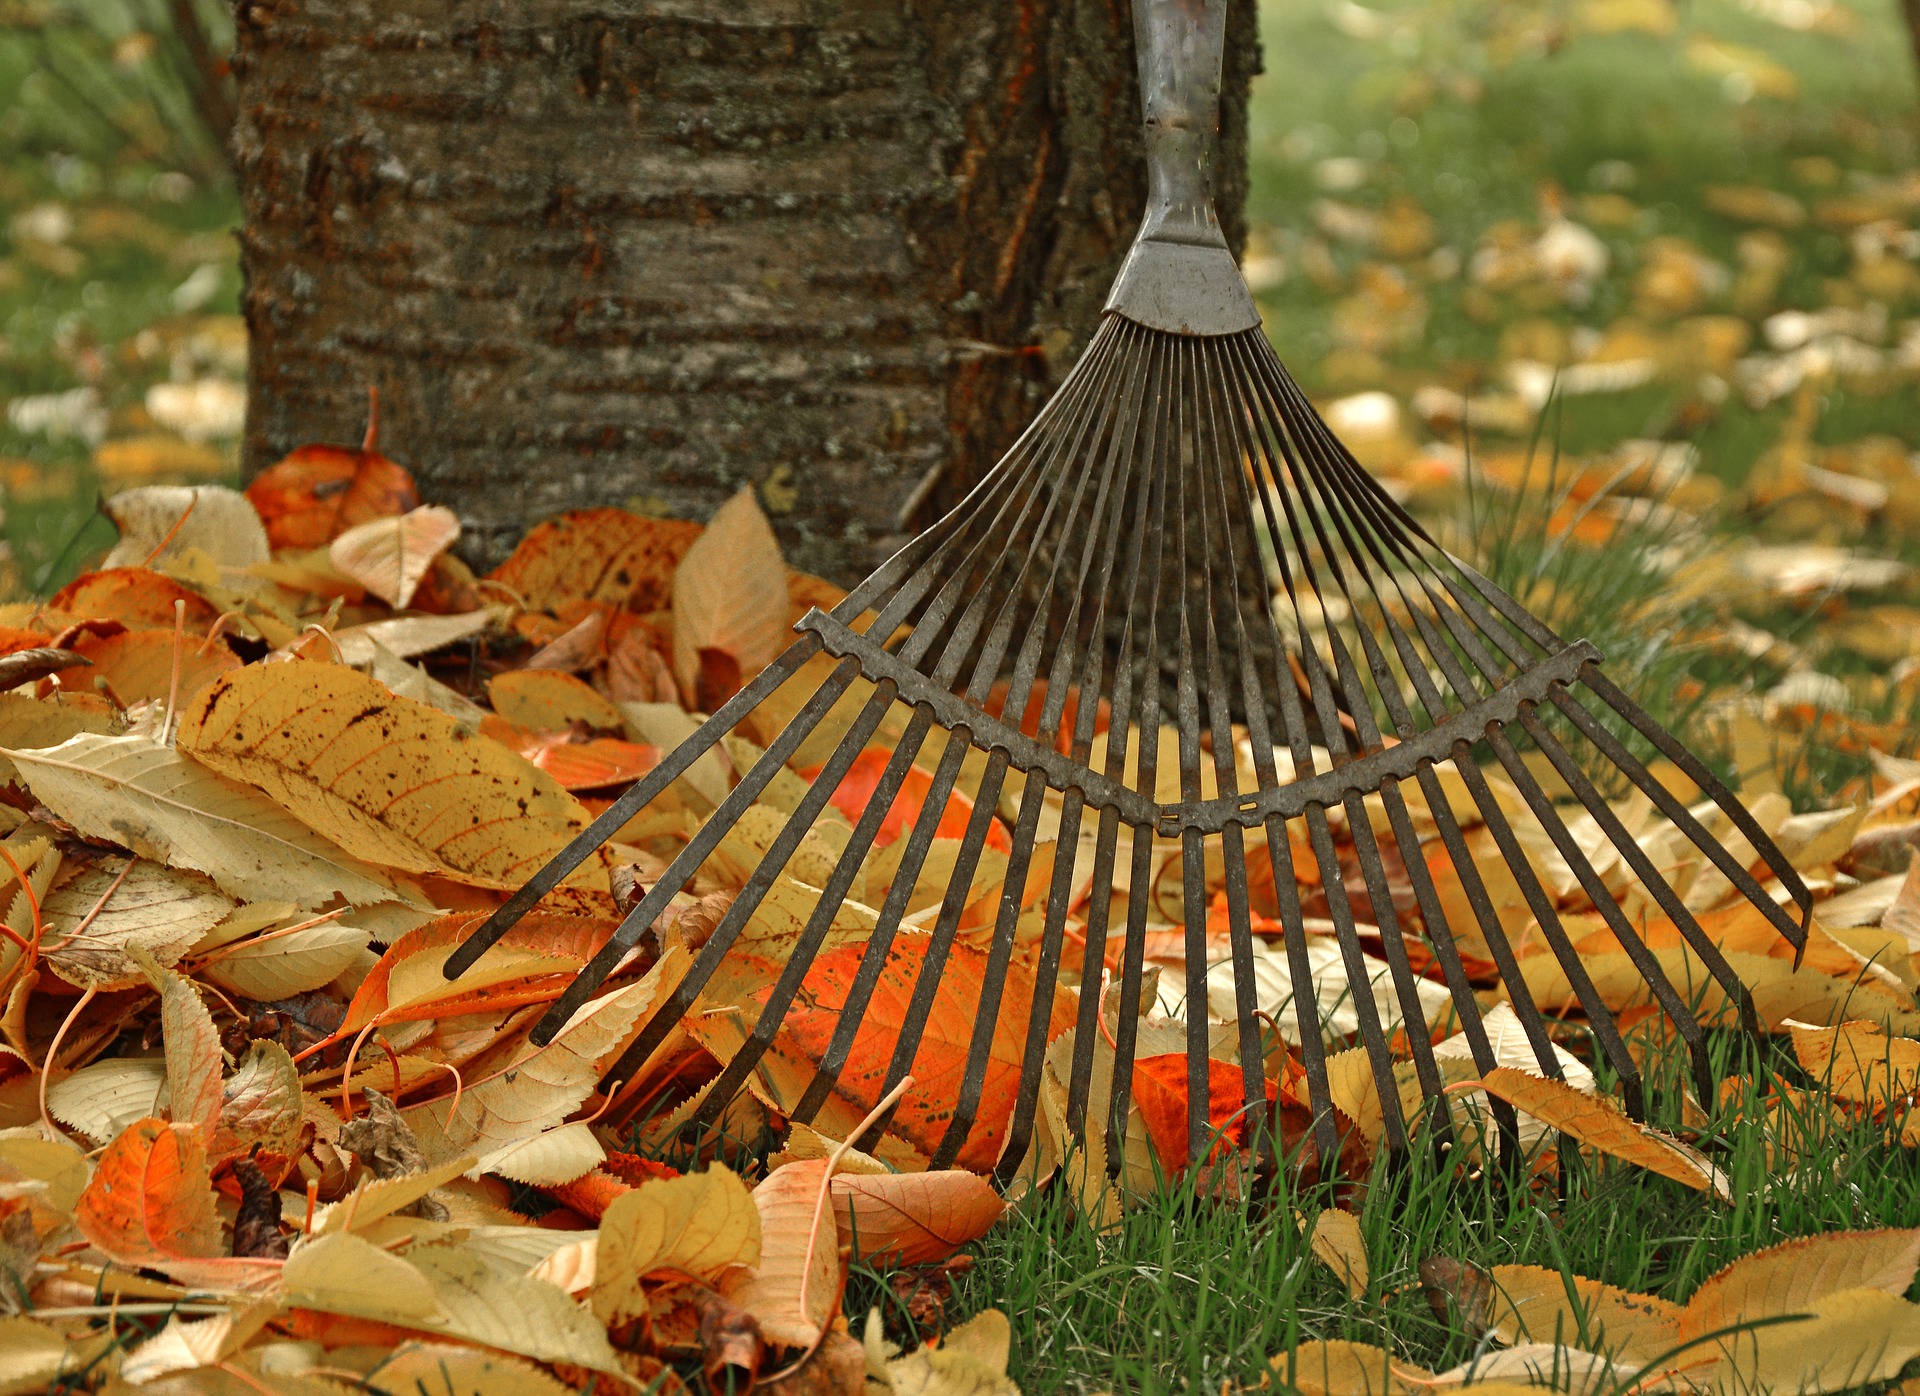 Autumn Gardening: How to keep your garden thriving into winter